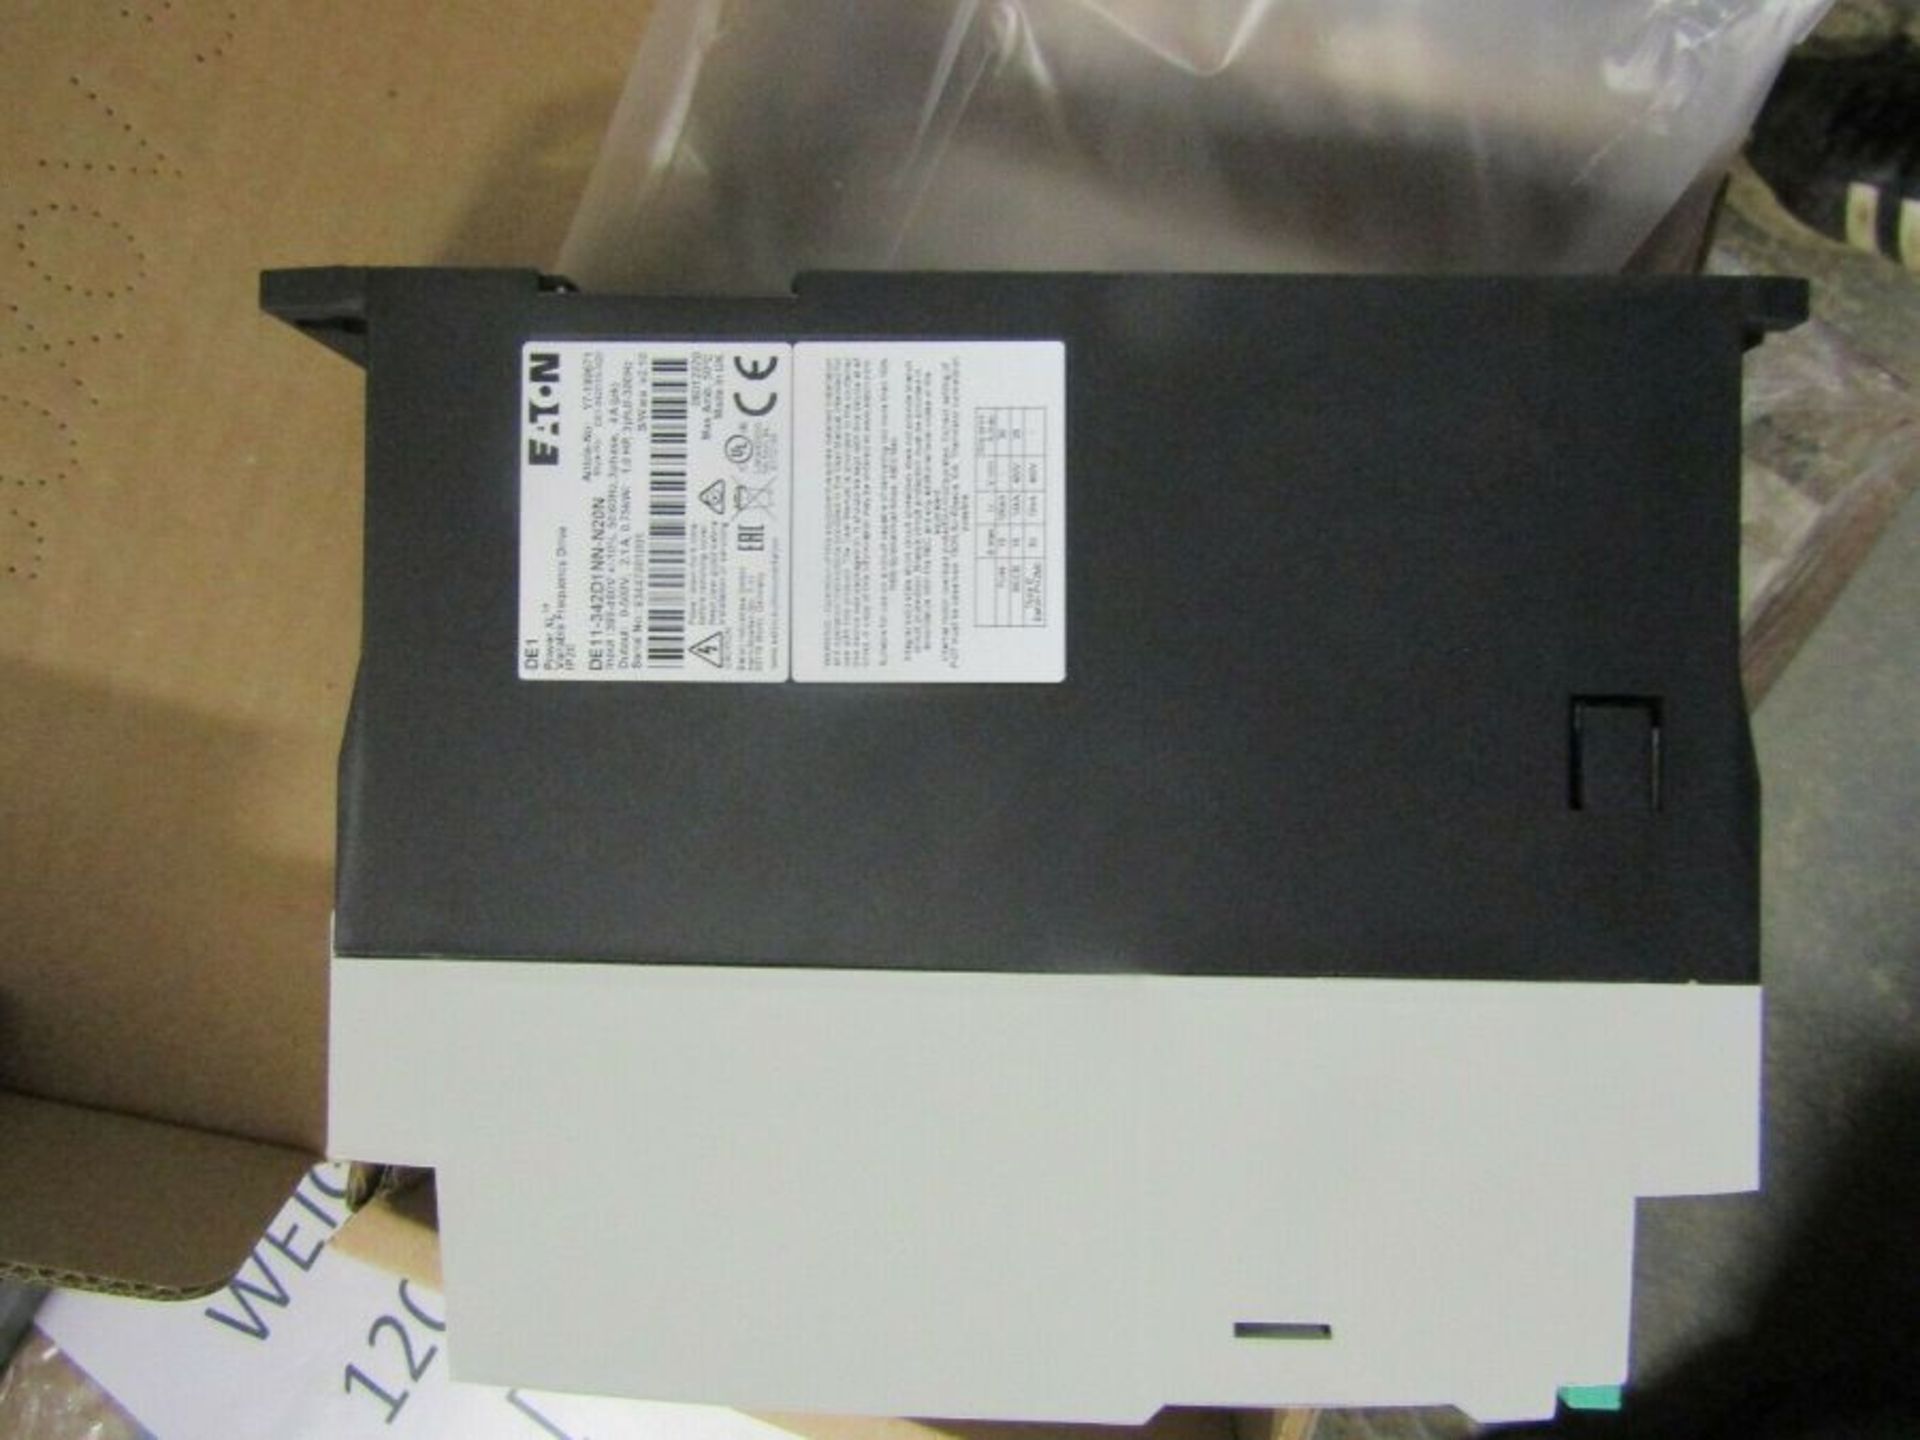 Eaton Variable Speed Starter 3-Phase In 60Hz 0.75kW 480Vac 2.1A DE11 tbl 1675076 - Image 2 of 3